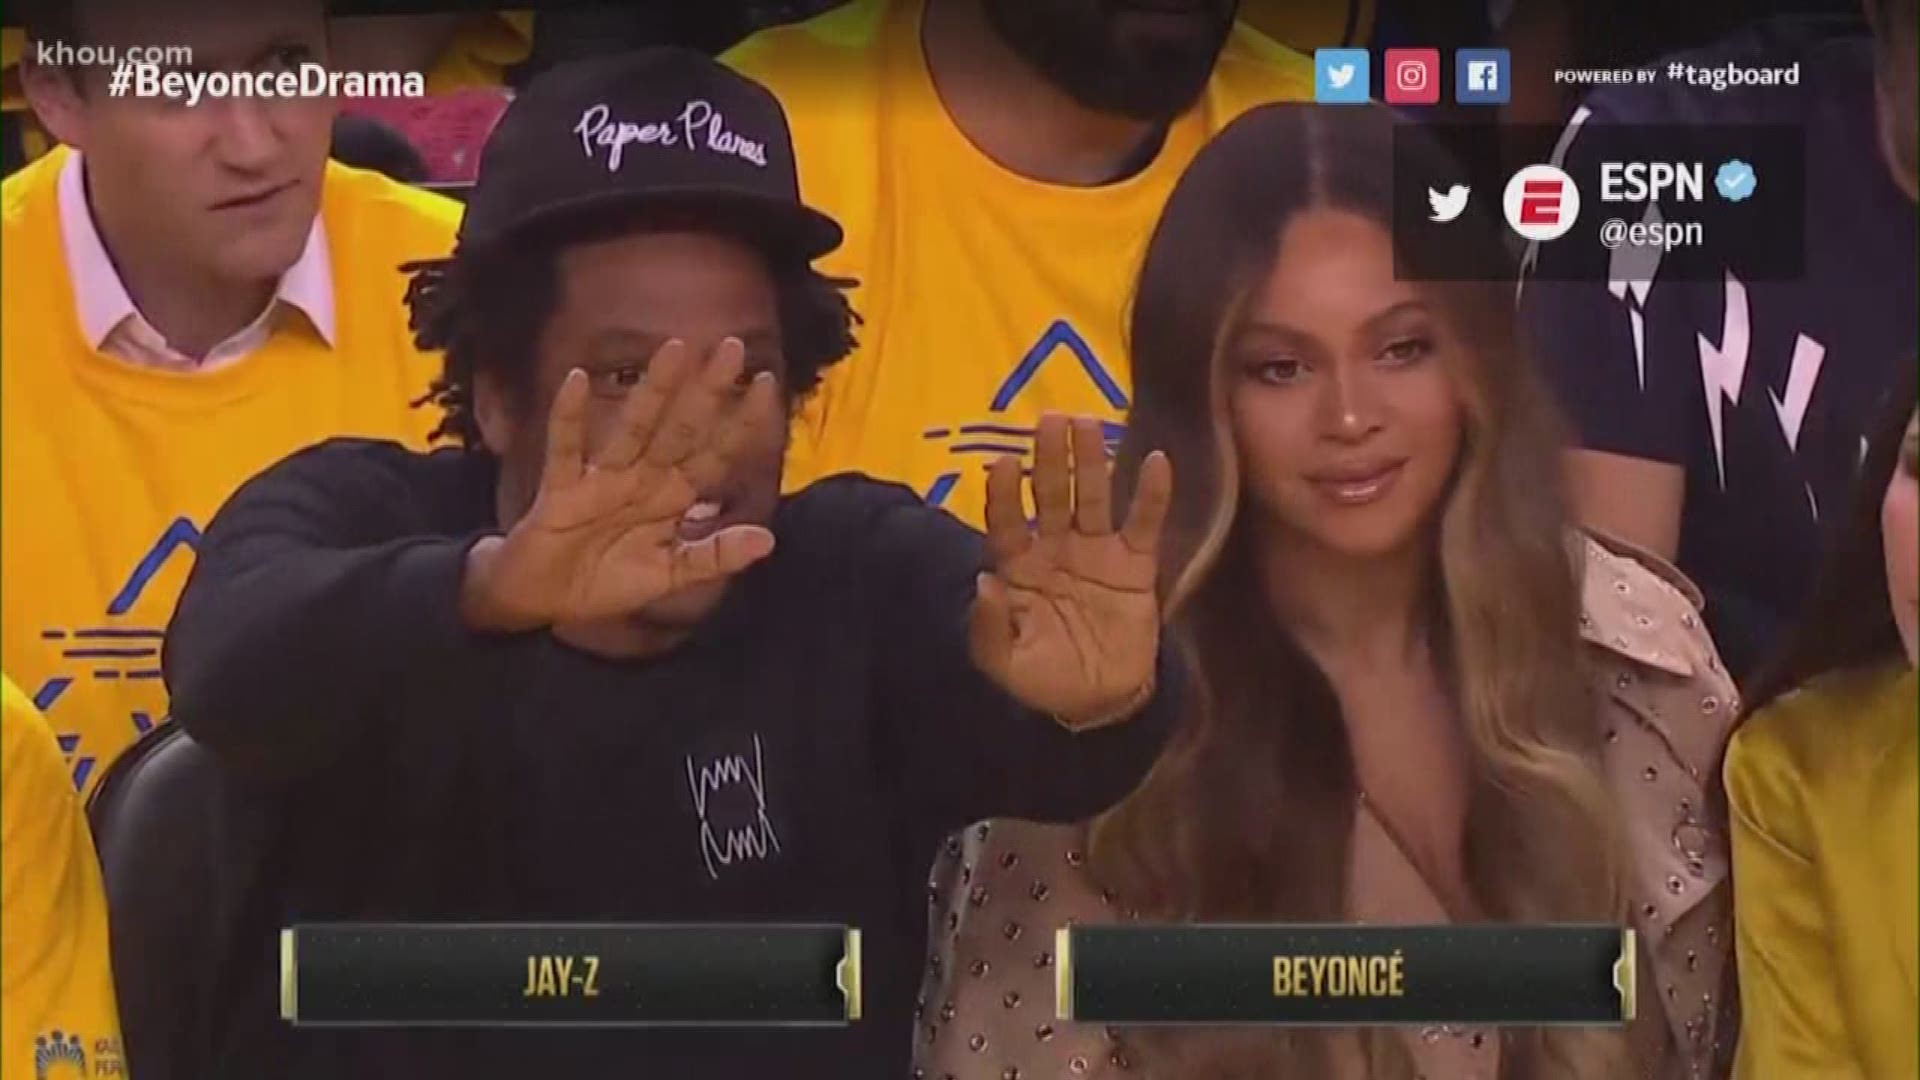 Queen Bey is breaking the internet once again. Many are buzzing over the interaction she had with Nicole Curran, the wife of Golden State Warriors owner Joe Lacob, at Game 3 of the NBA finals.